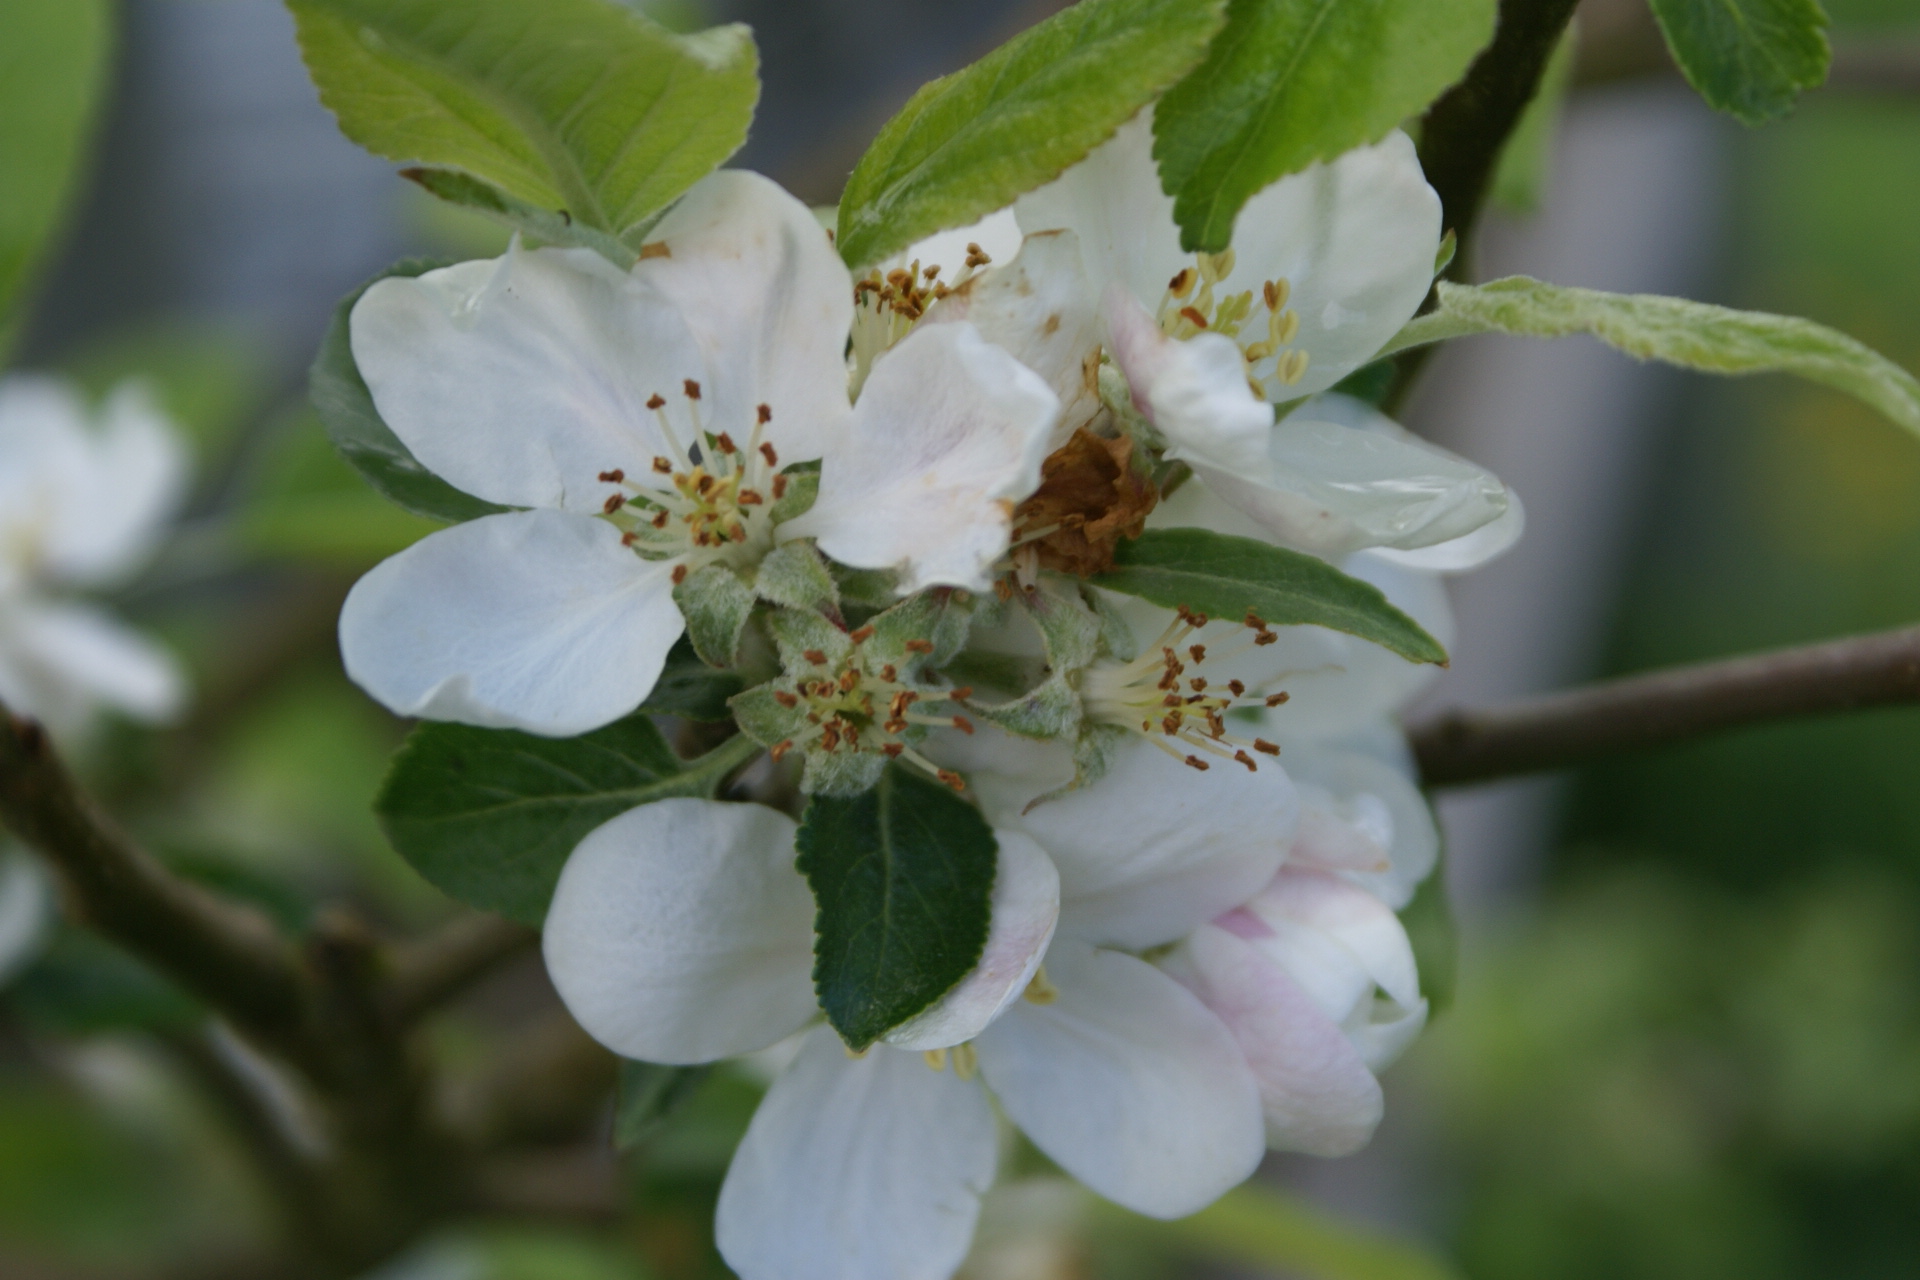 Apple blossom at Eco-Gites of Lenault, a 5 person gite in Normandy.